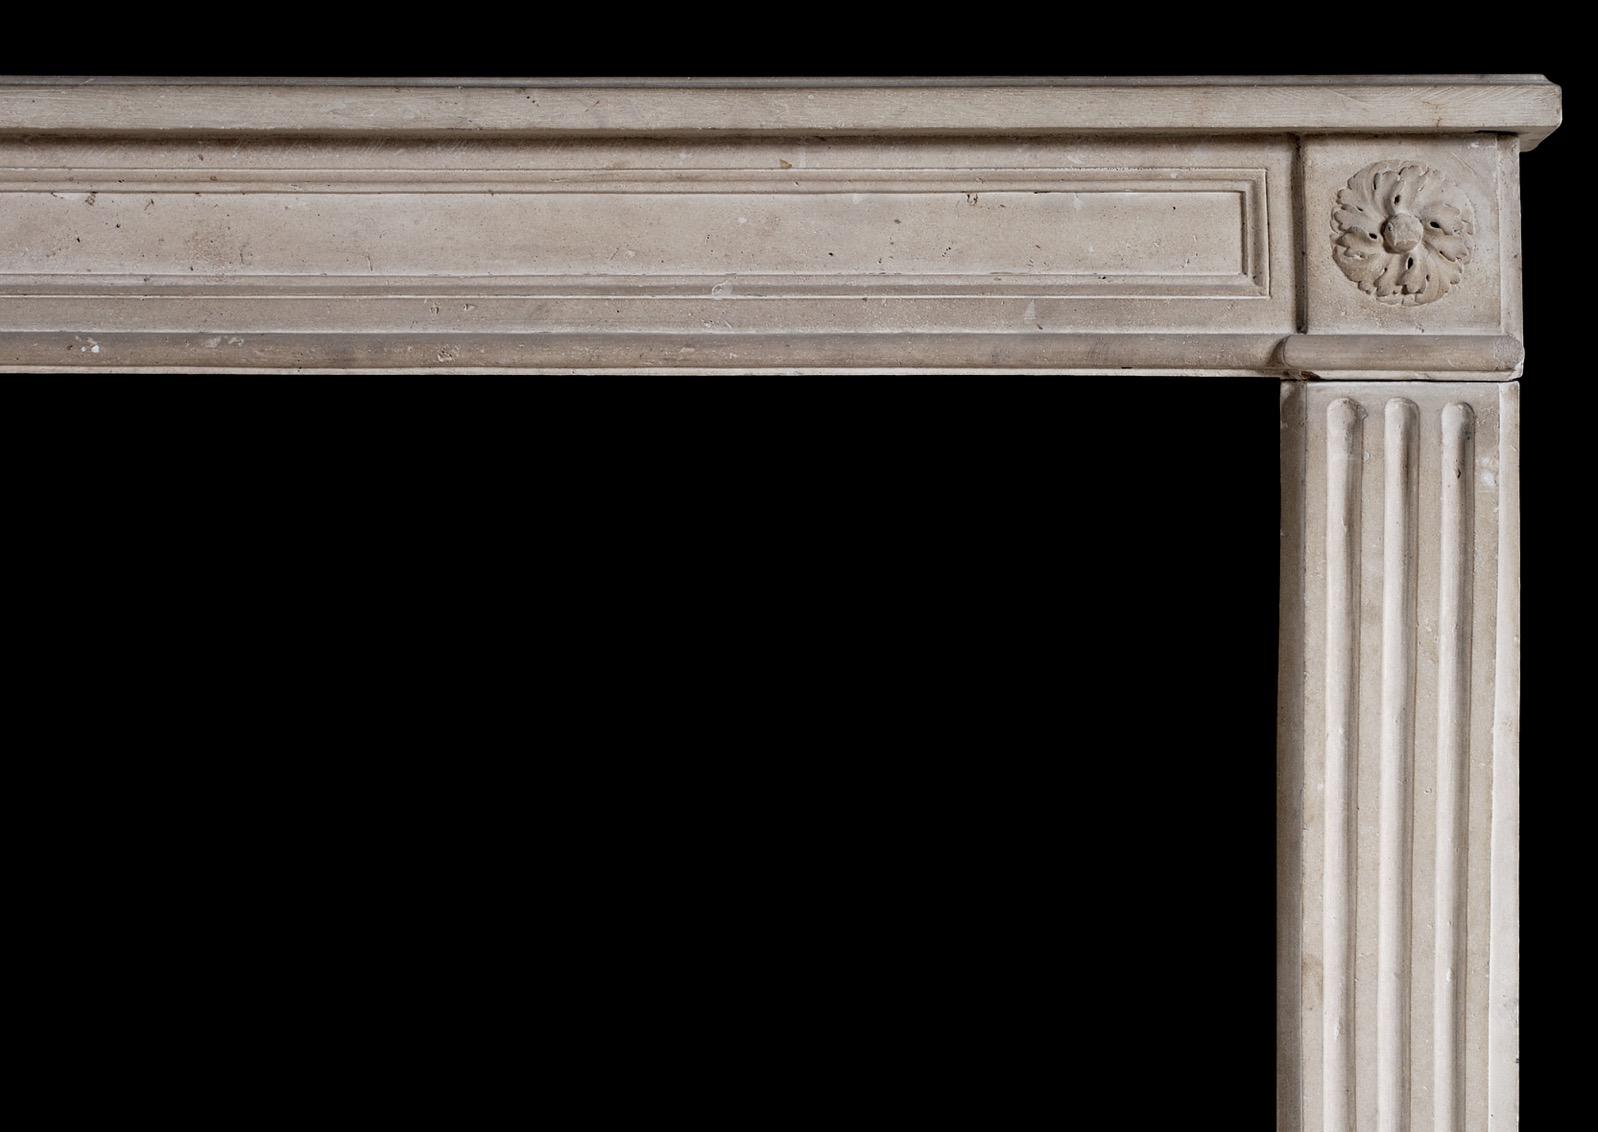 A 19th century French Louis XVI style stone fireplace. The fluted, shaped jambs surmounted by swirling carved paterae, the panelled frieze with moulded shelf above.

Measures: Shelf width 1605 mm 63 ¼